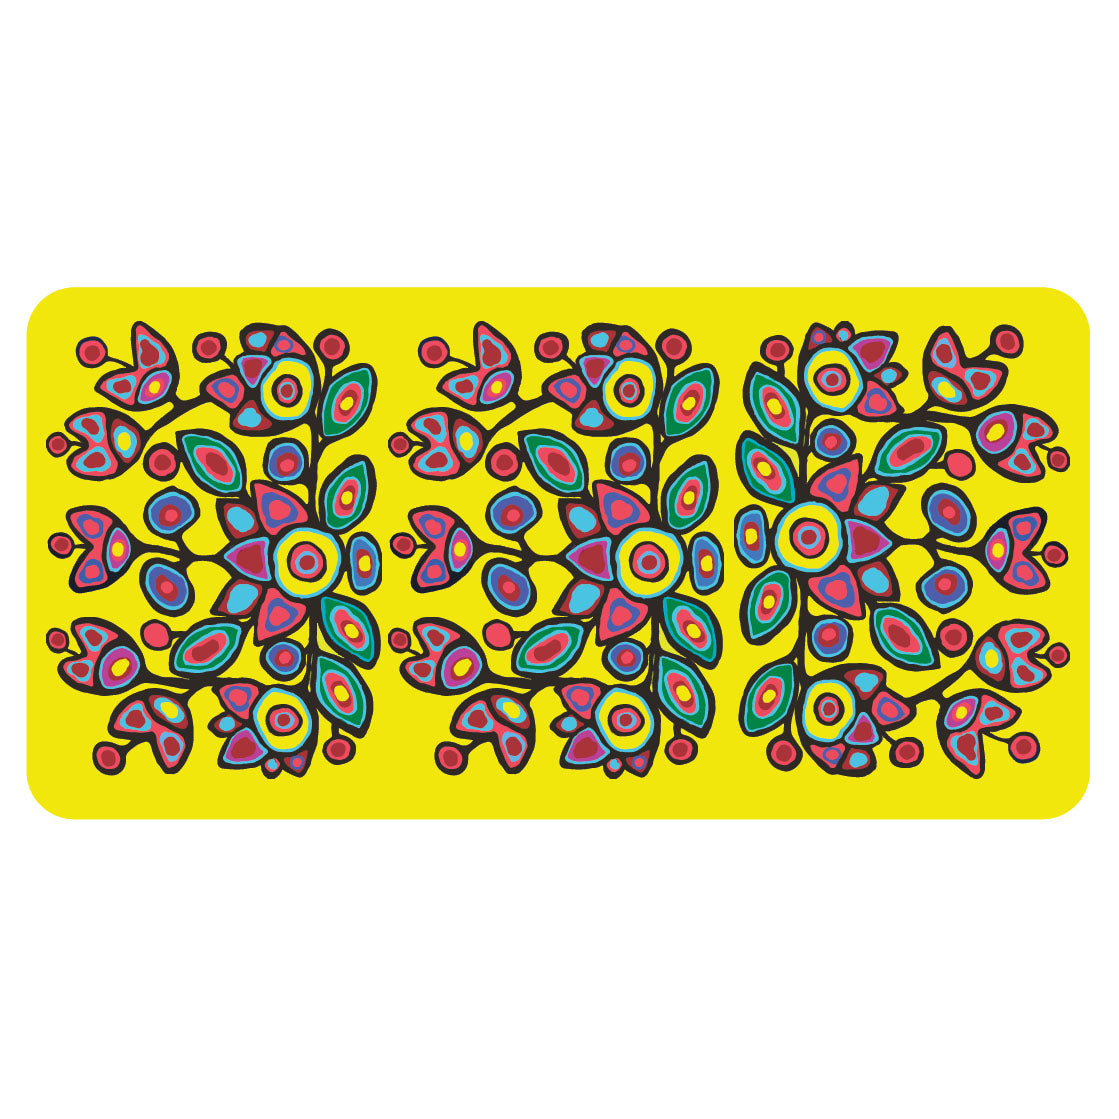 Norval Morrisseau Floral on Yellow Travel Quick-dry Towel